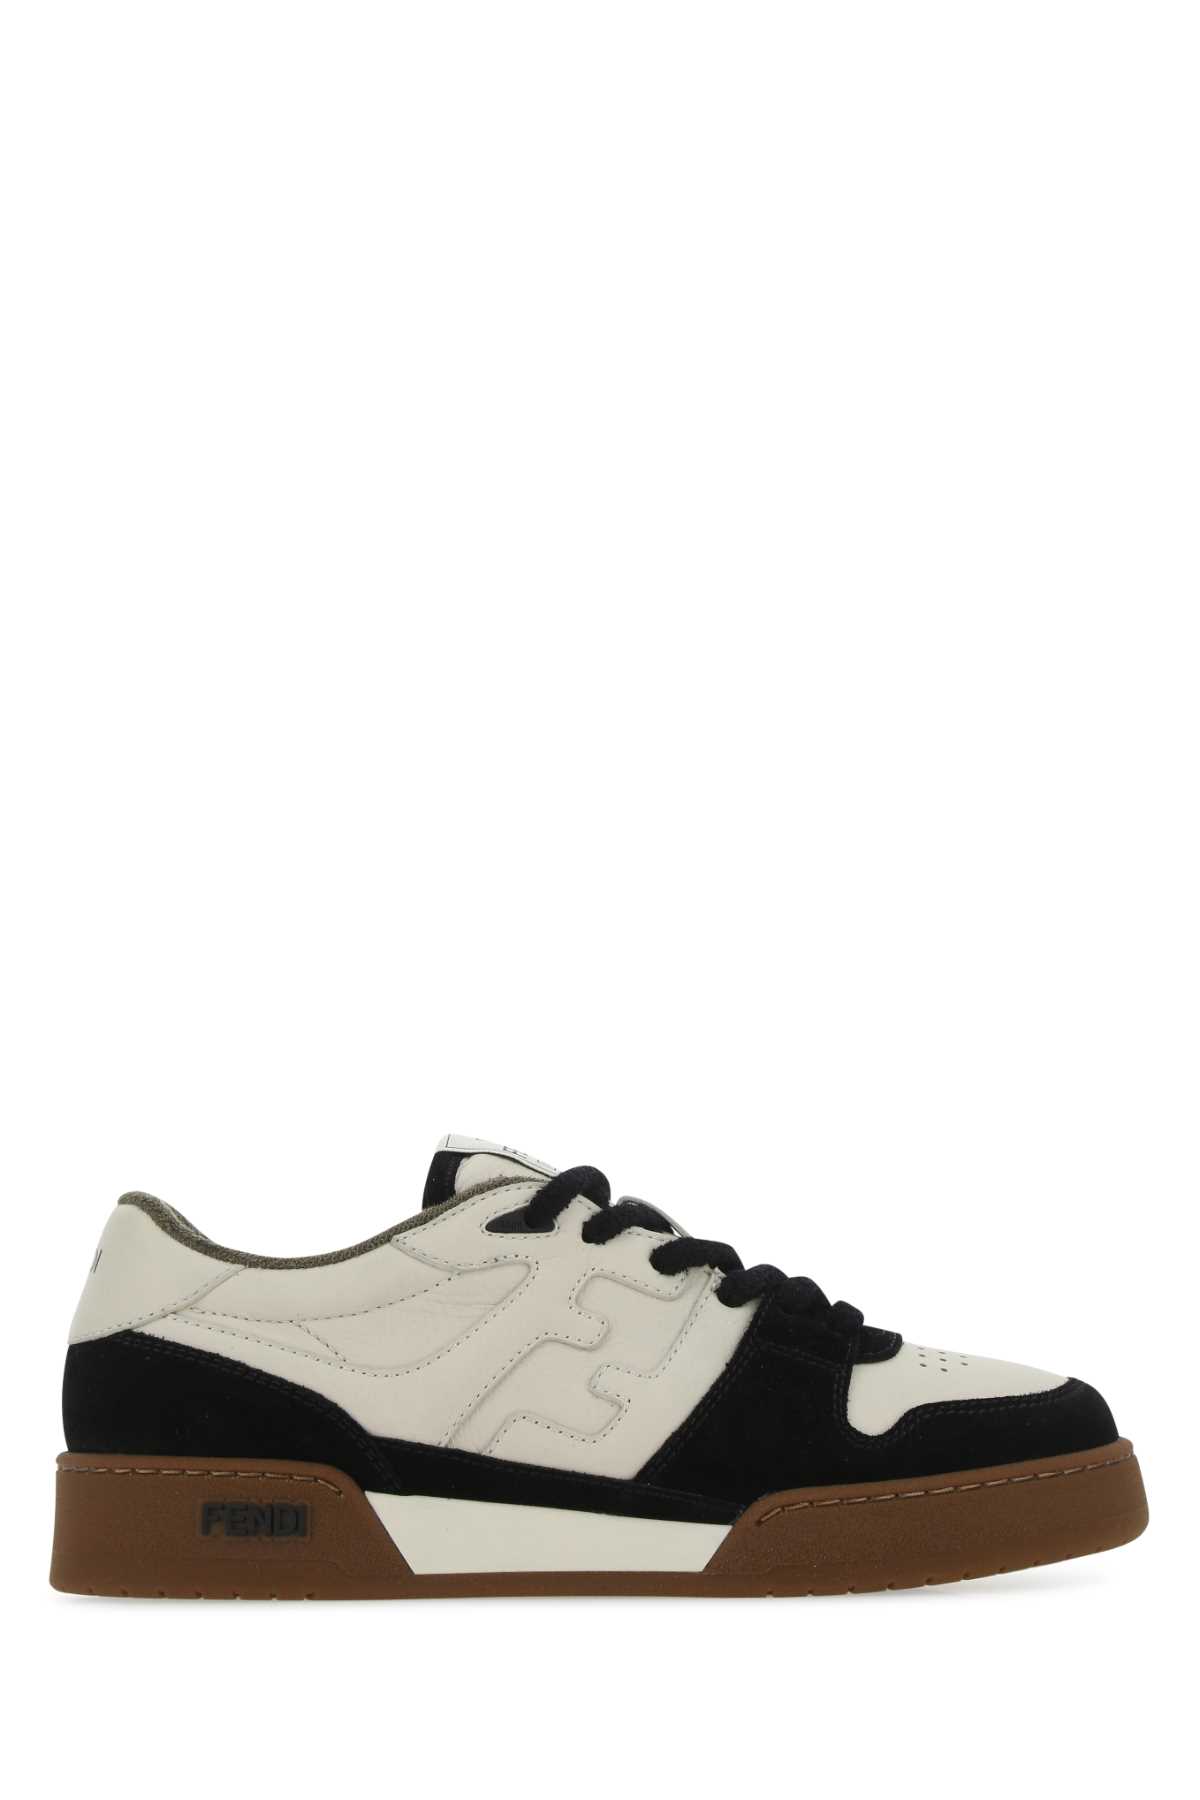 Shop Fendi Multicolor Leather And Suede  Match Sneakers In F1fzb